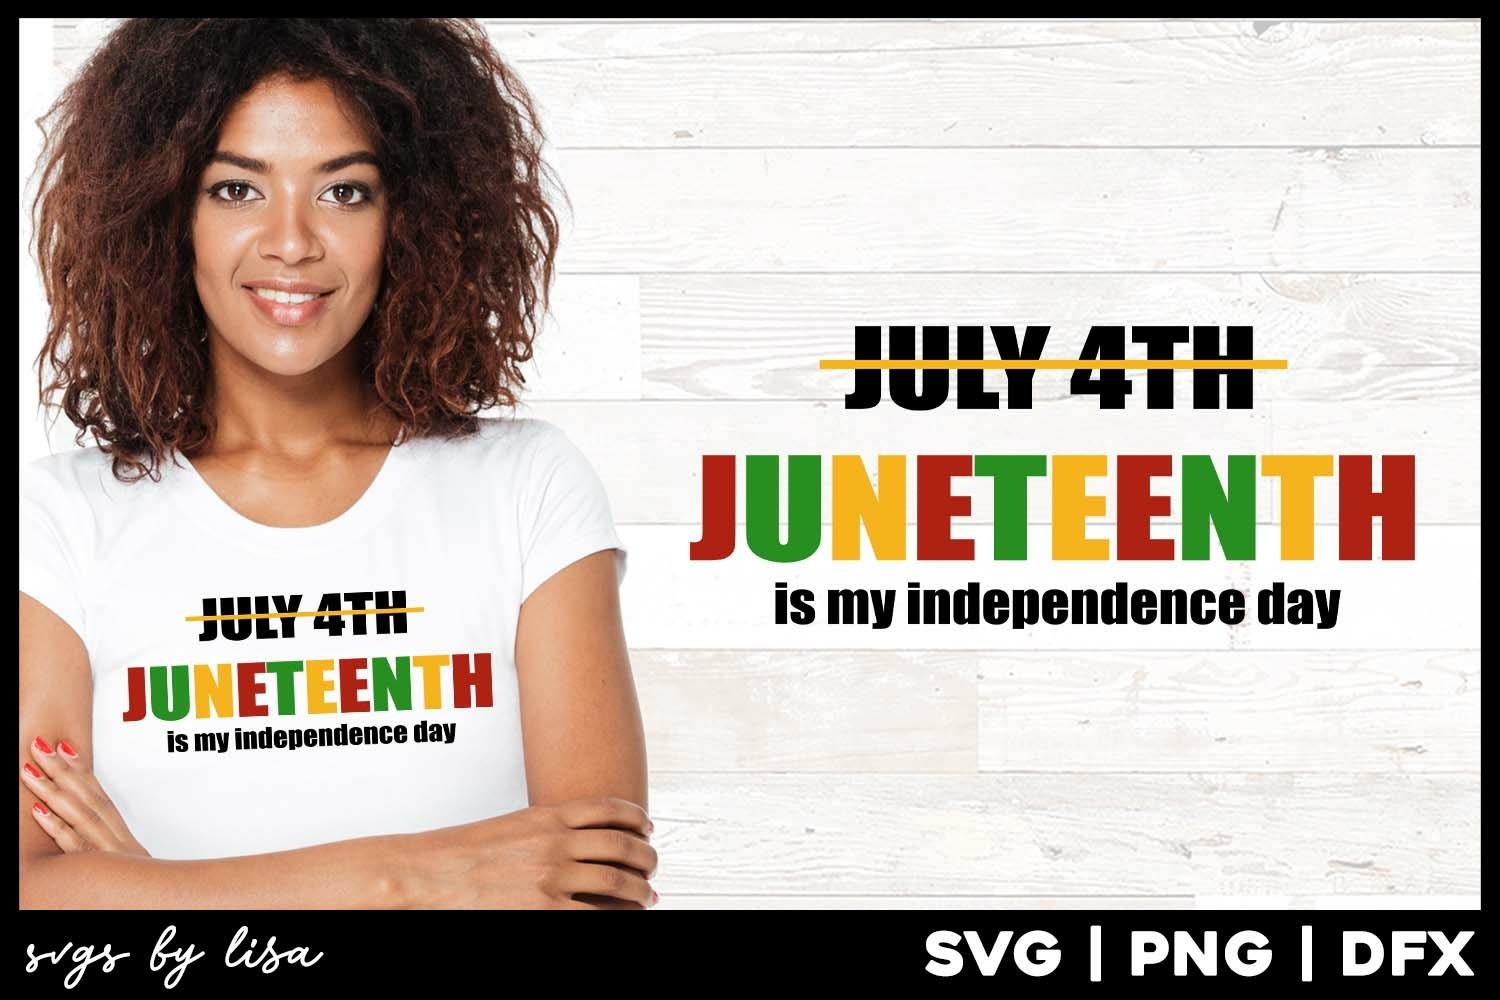 Juneteenth is my independence day - colorful print.